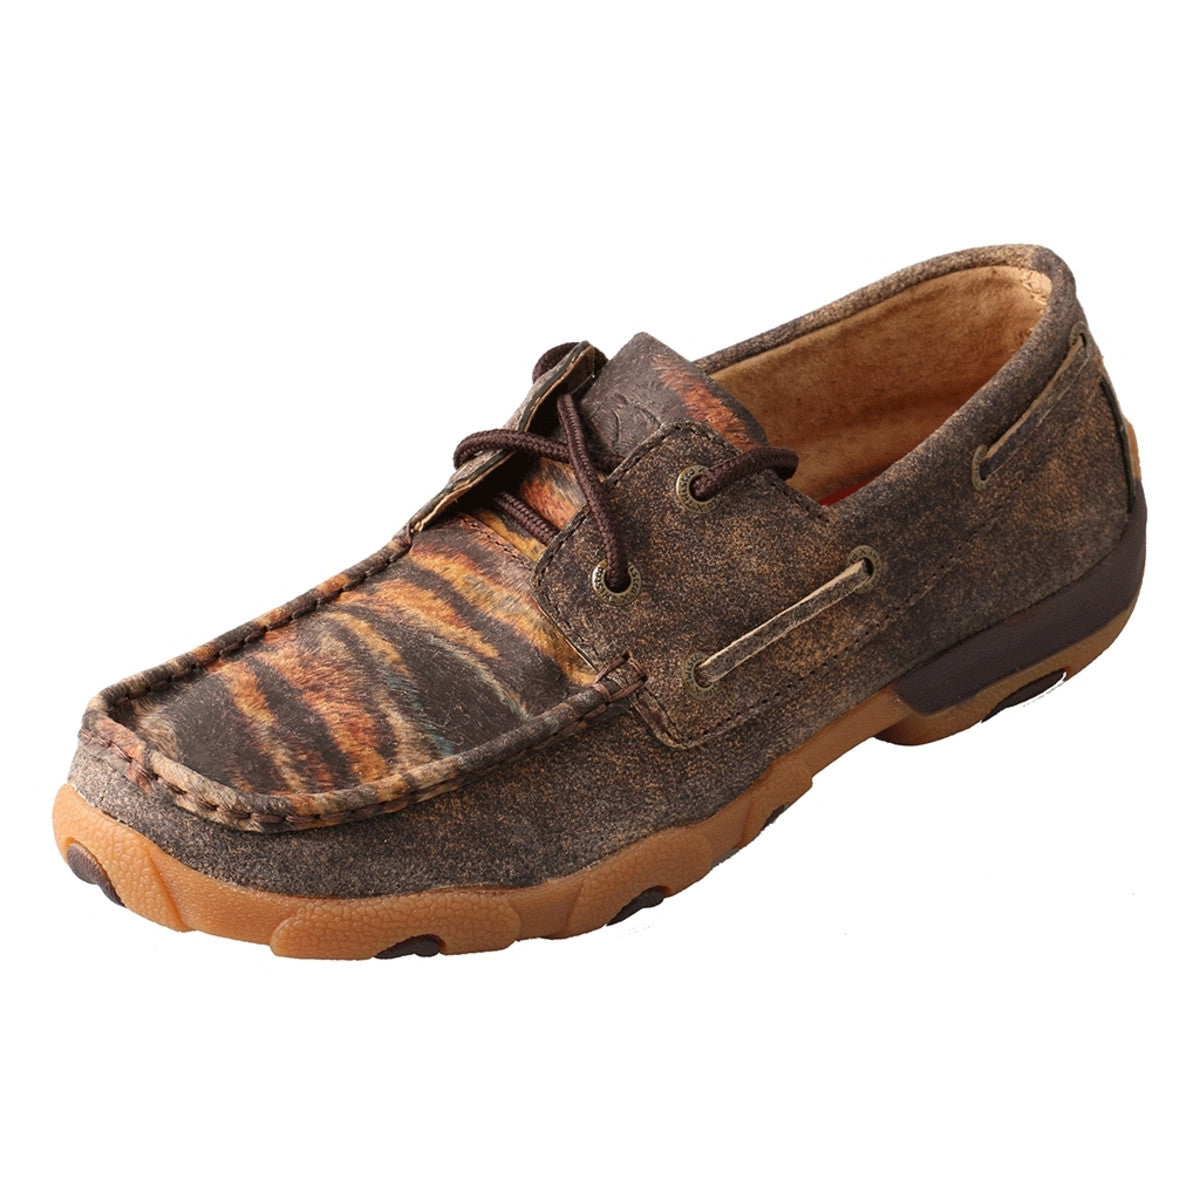 Women's Twisted X Boat Shoe Driving Moccasins in Distressed/Tiger from the side view